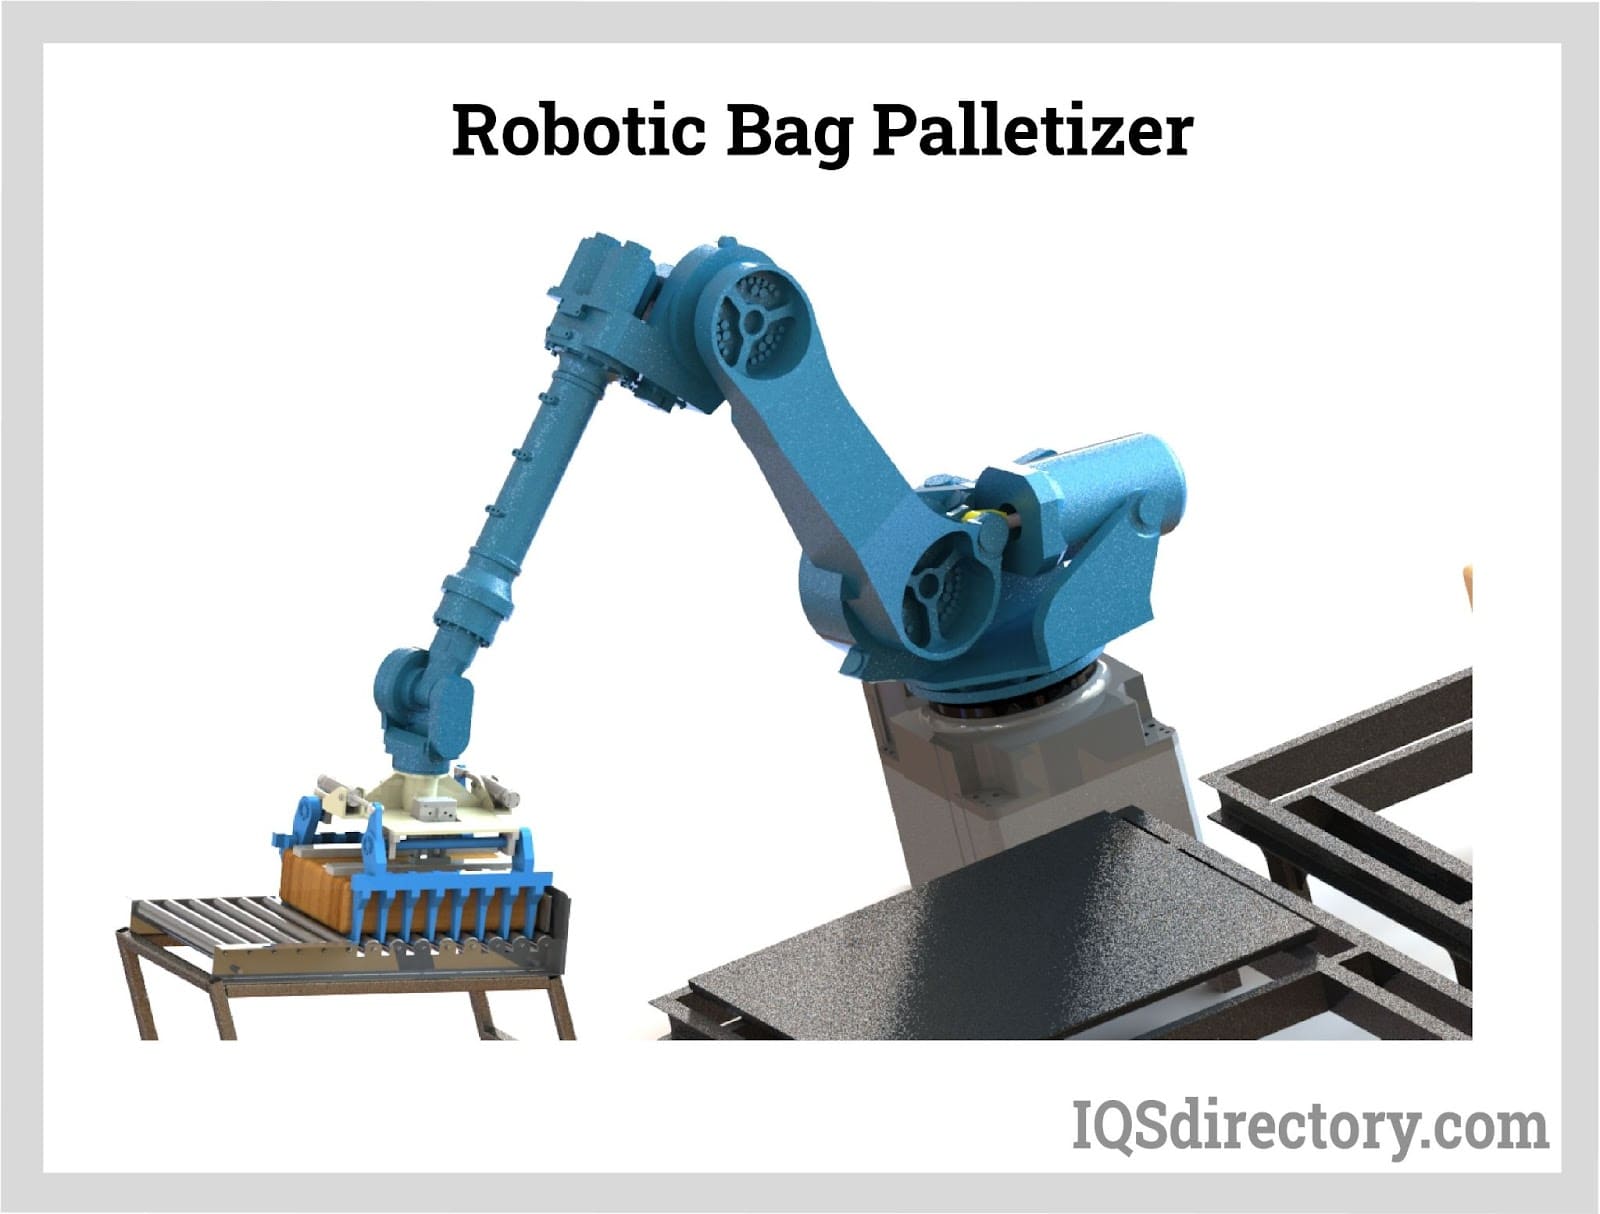 Palletizing of valve and open-mouth bags | Case Study - Europack Italy